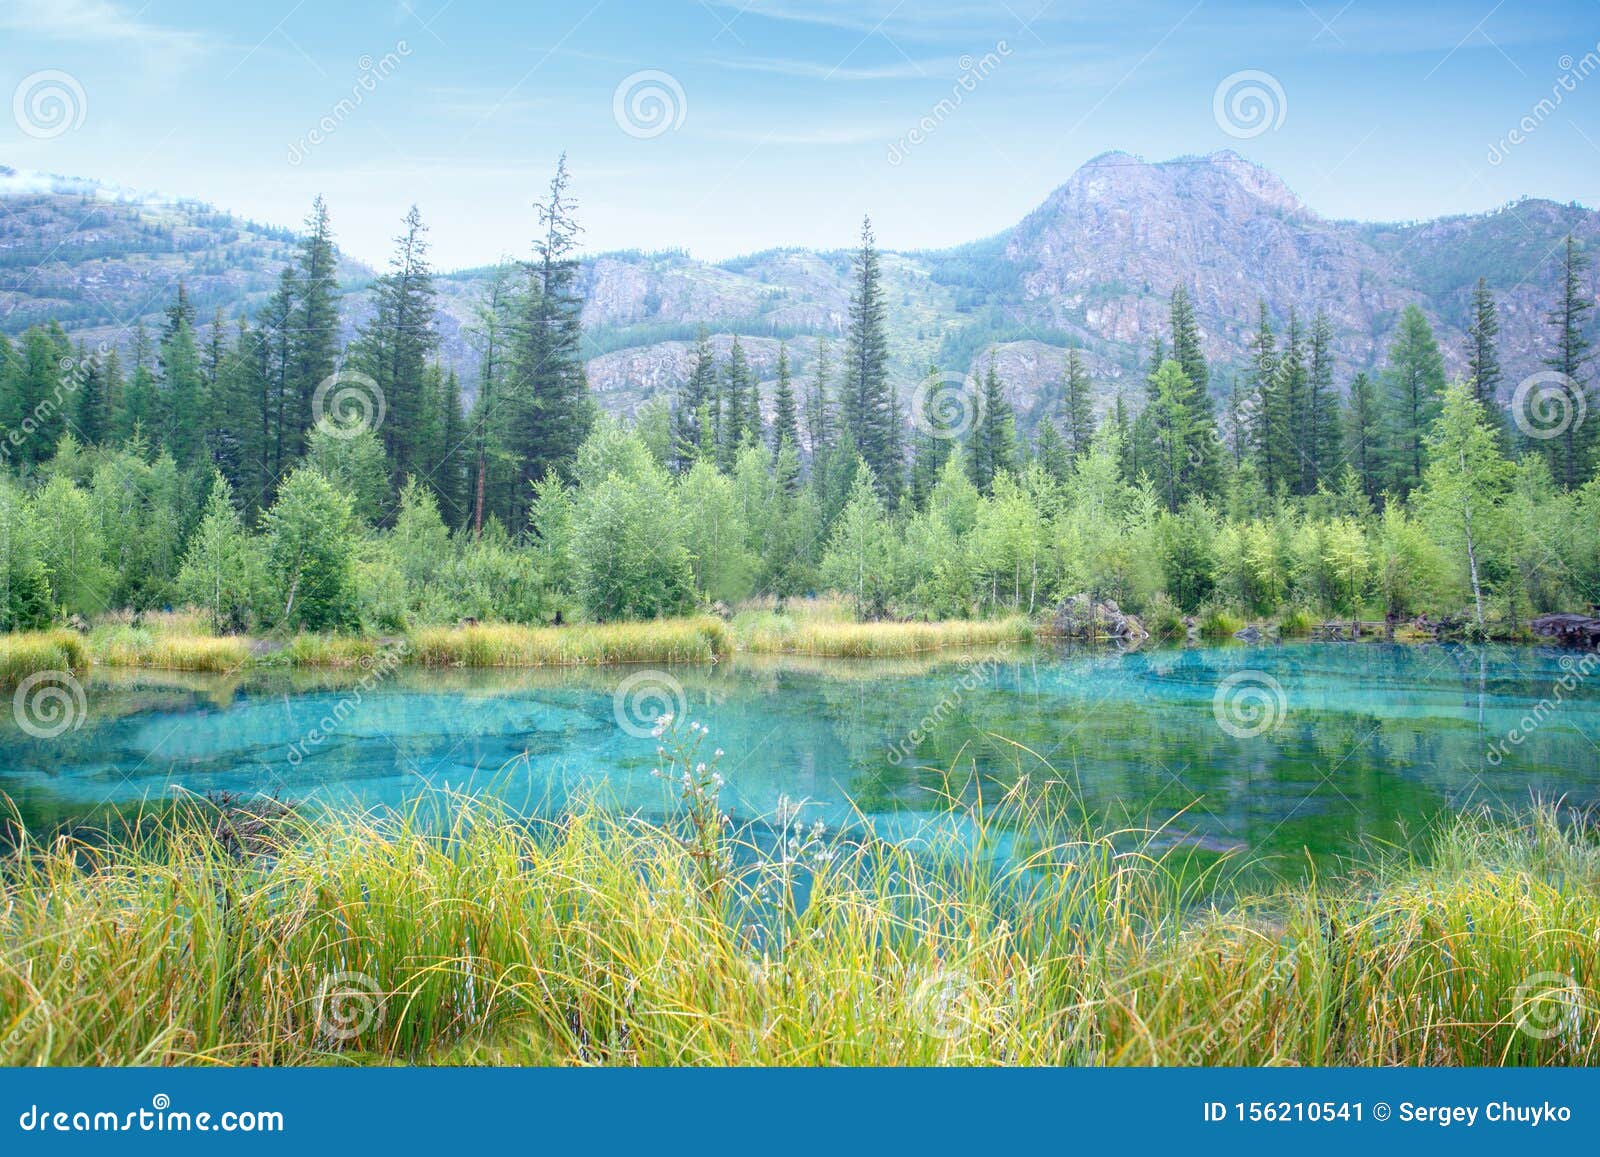 Nature Mountain Scene With Beautiful Lake And Mountains In Summer Or